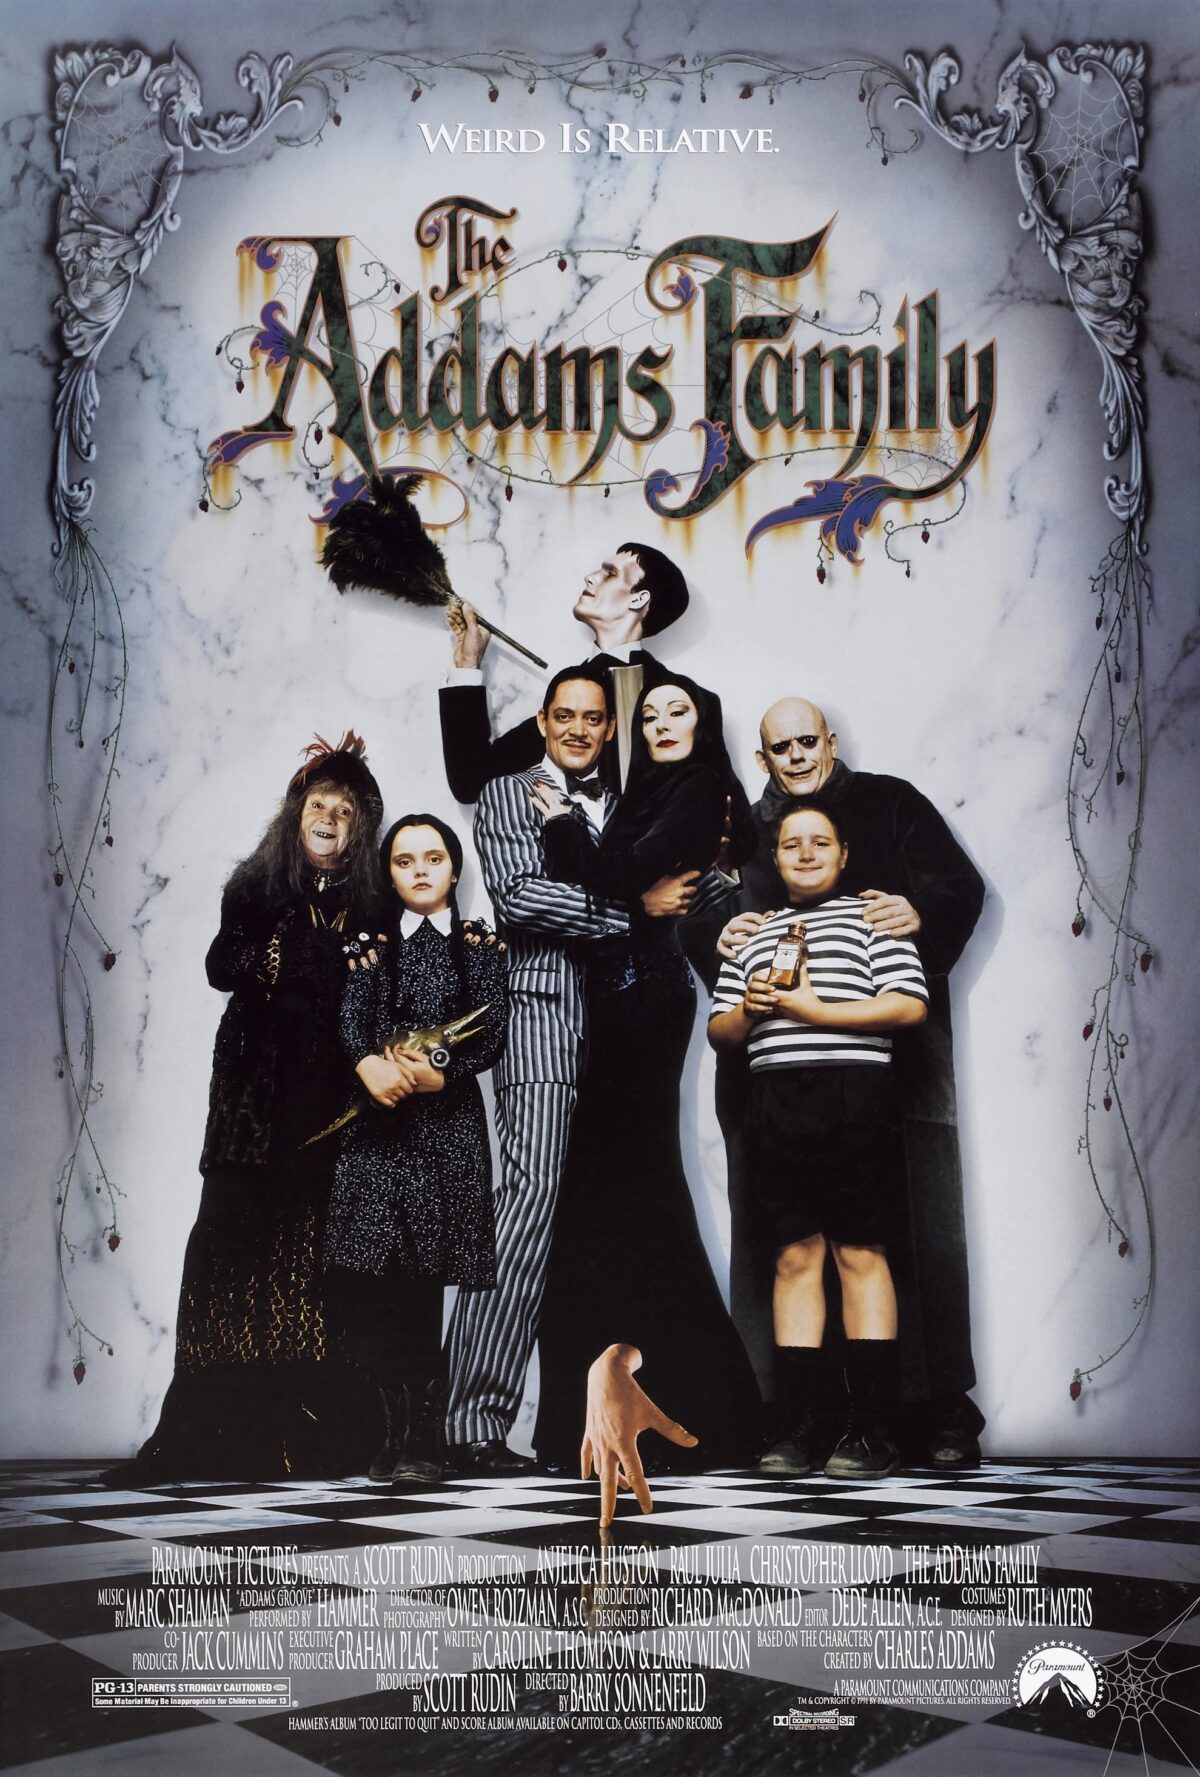 movie poster for The addams family.